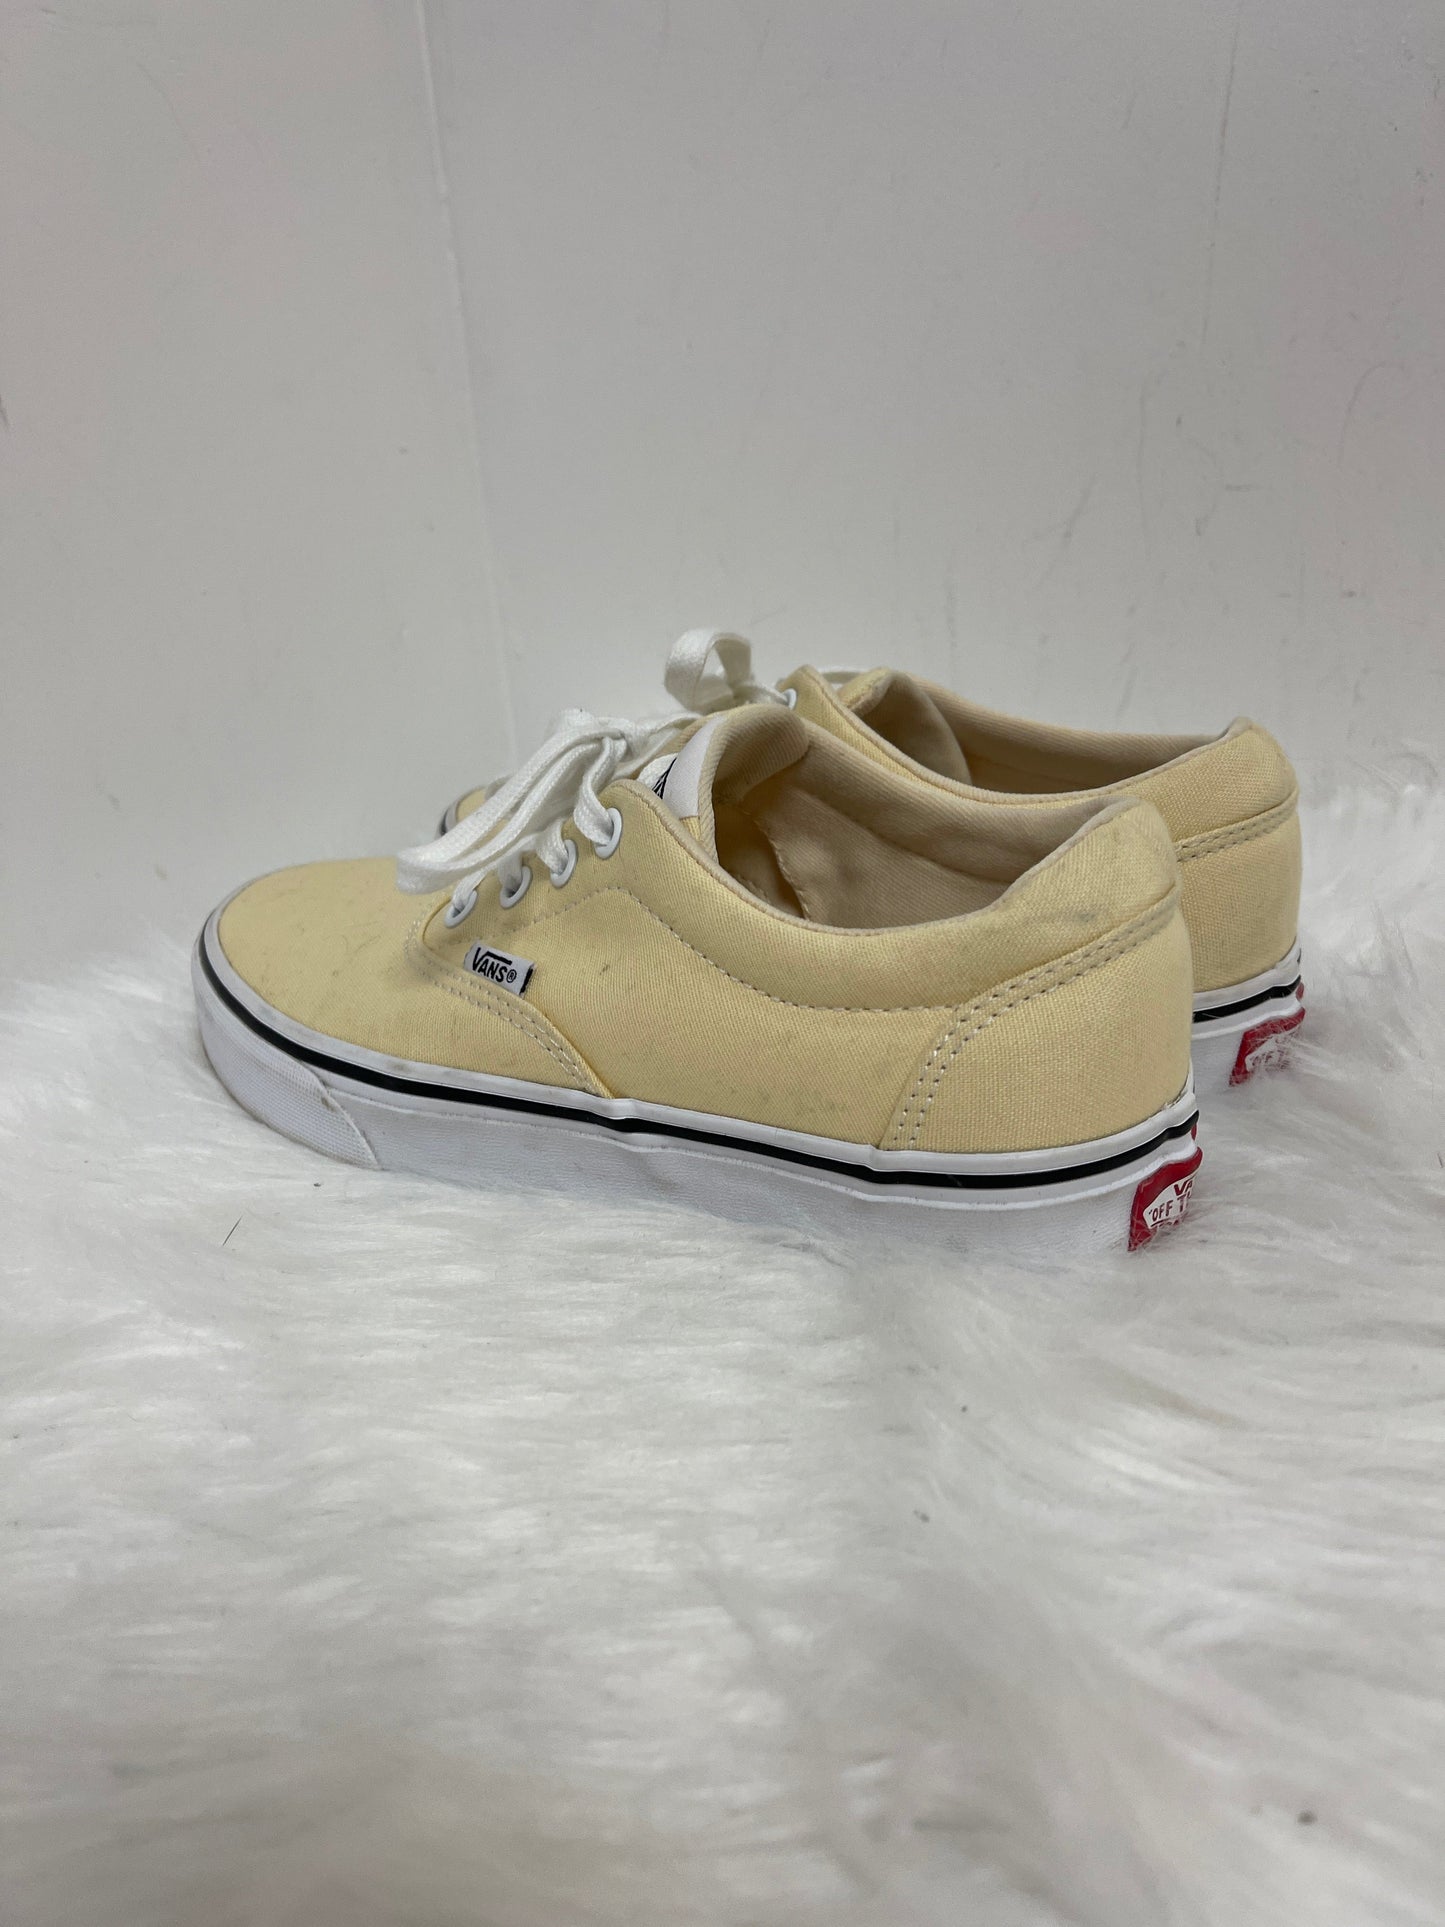 Yellow Shoes Sneakers Vans, Size 6.5